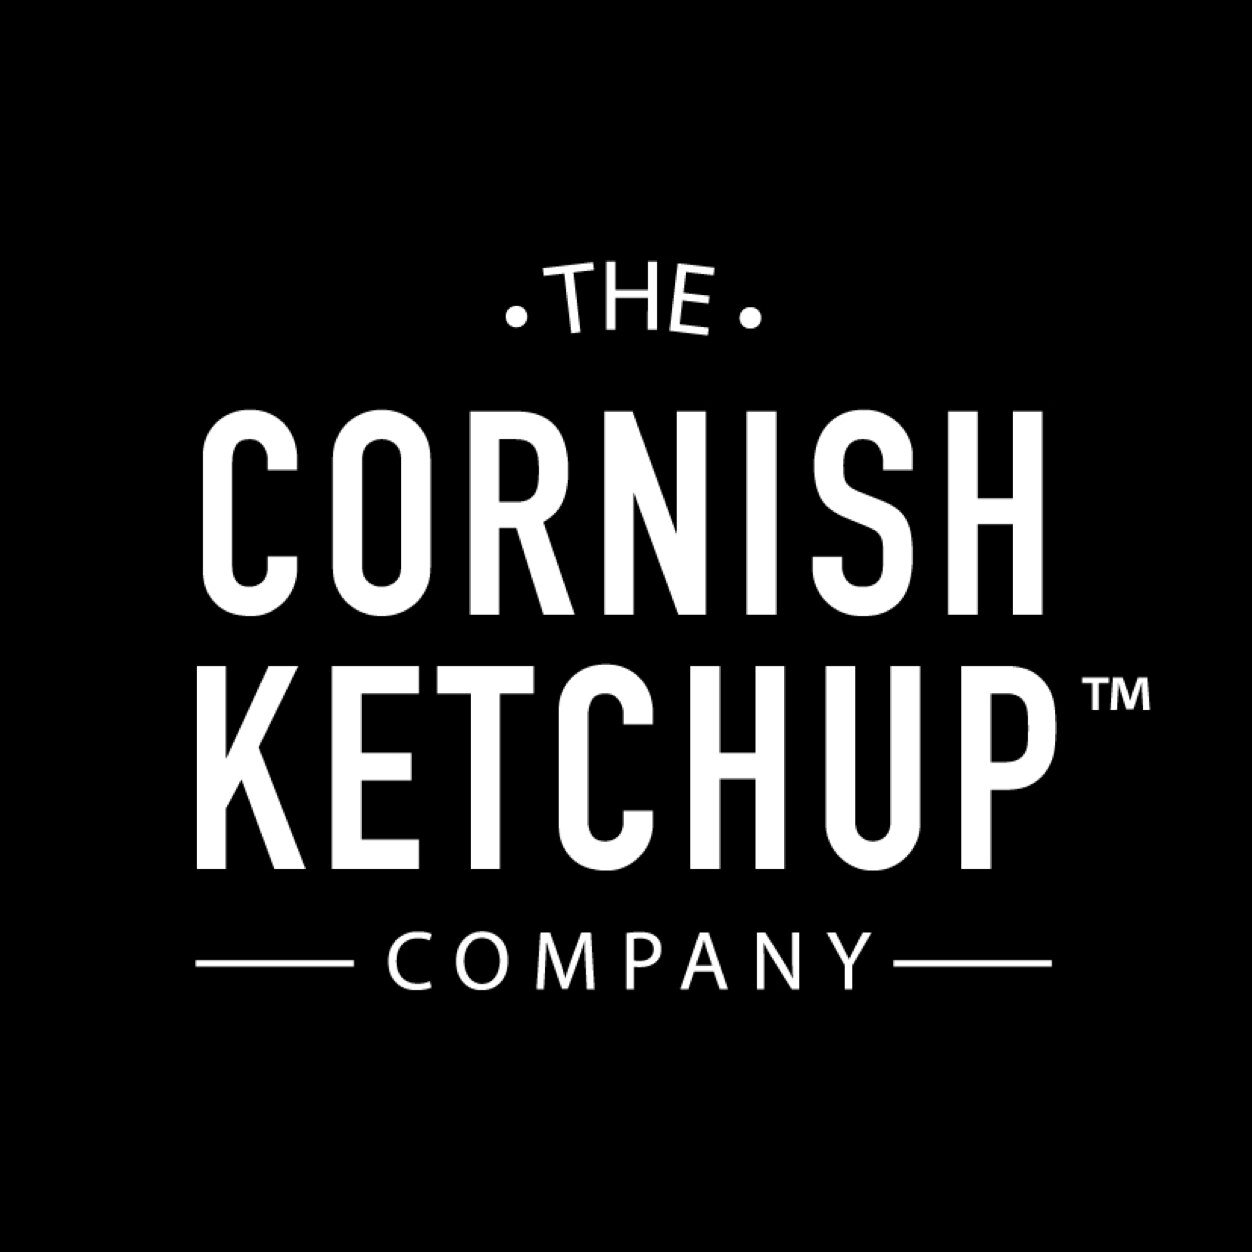 Its arrived!!! Locally made Cornish Ketchup using locally grown tomatoes whenever possible. Contact us for more details.